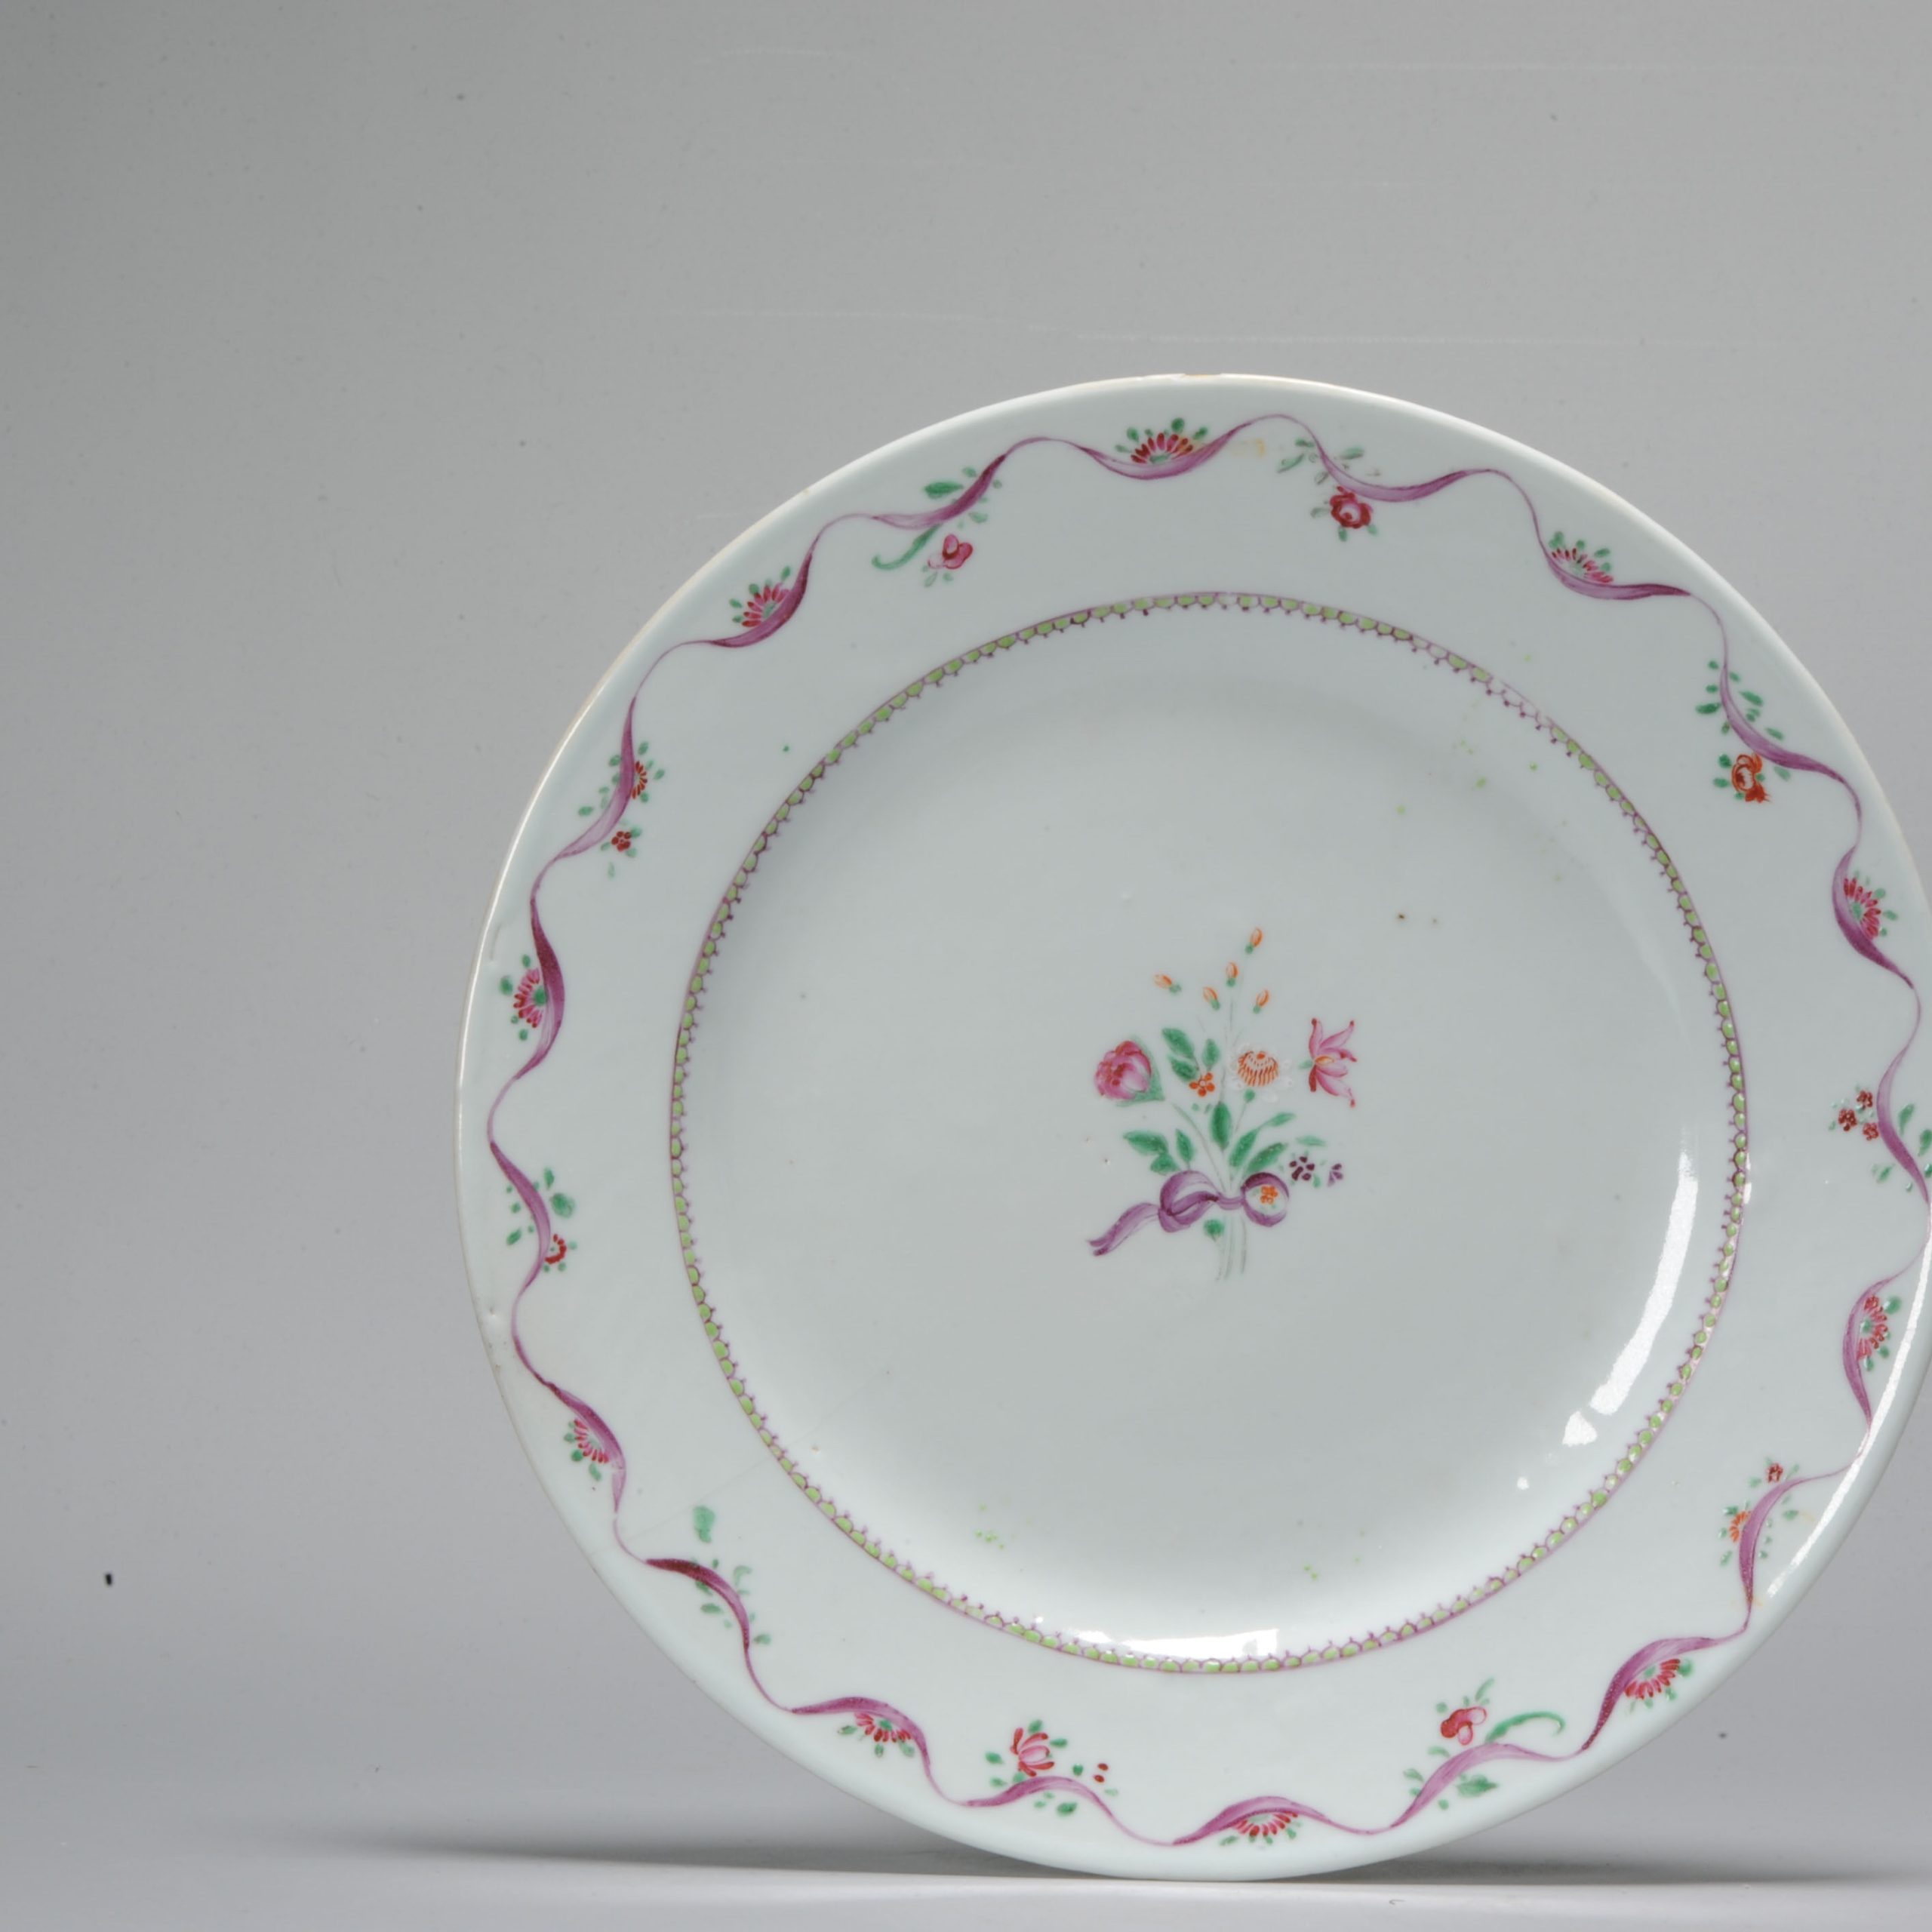 Antique 18C Chinese Porcelain Famille Rose Dish with flowers